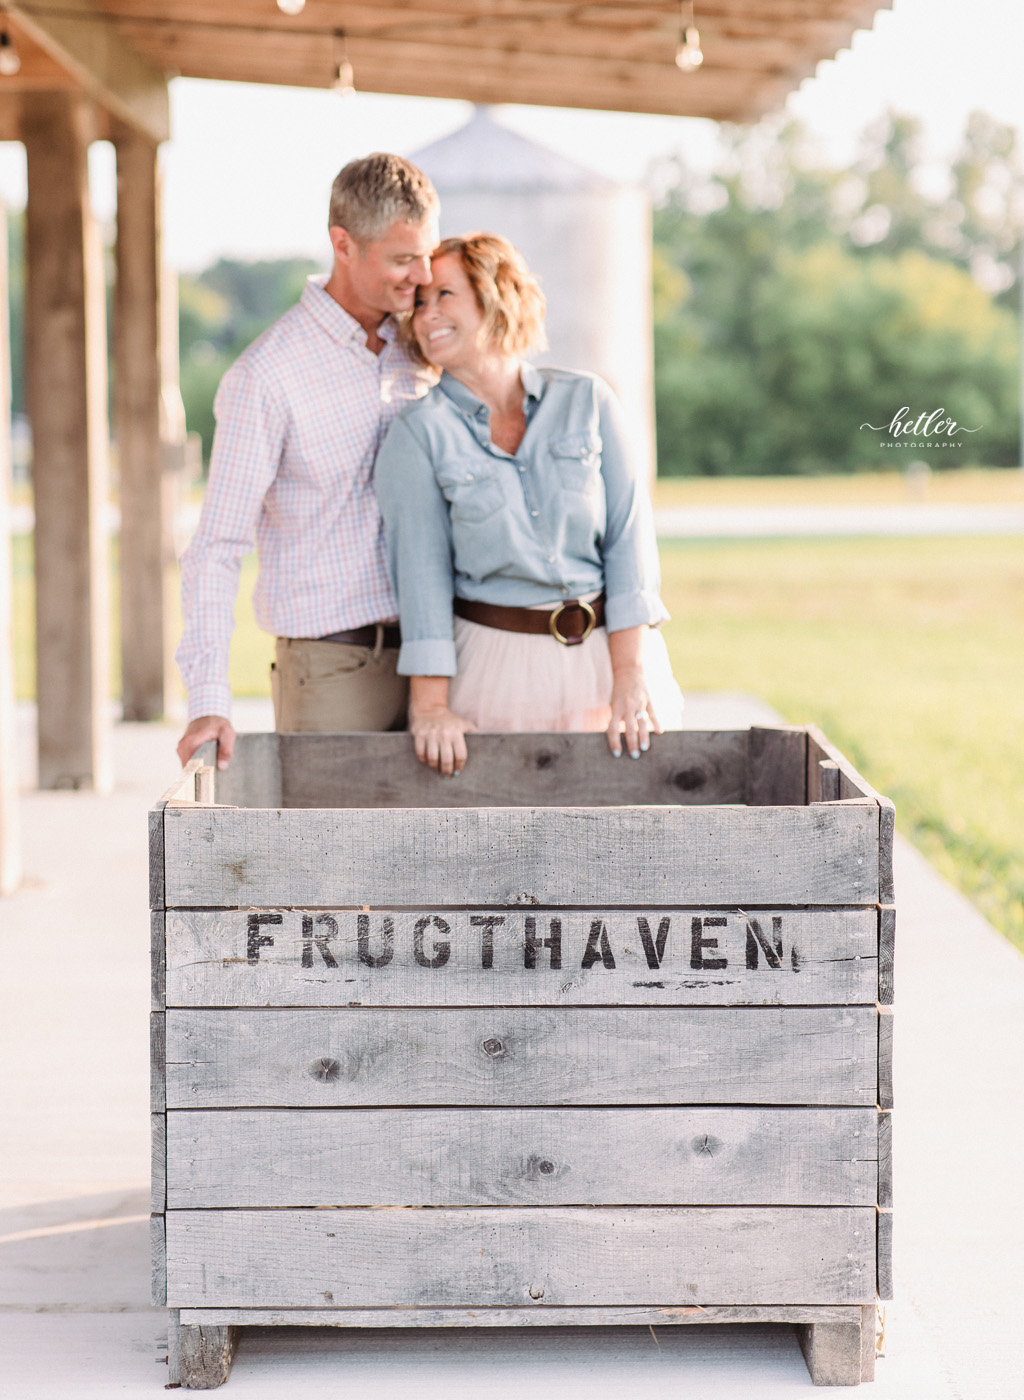 Frugthaven Farm family photo session in Greenville Michigan